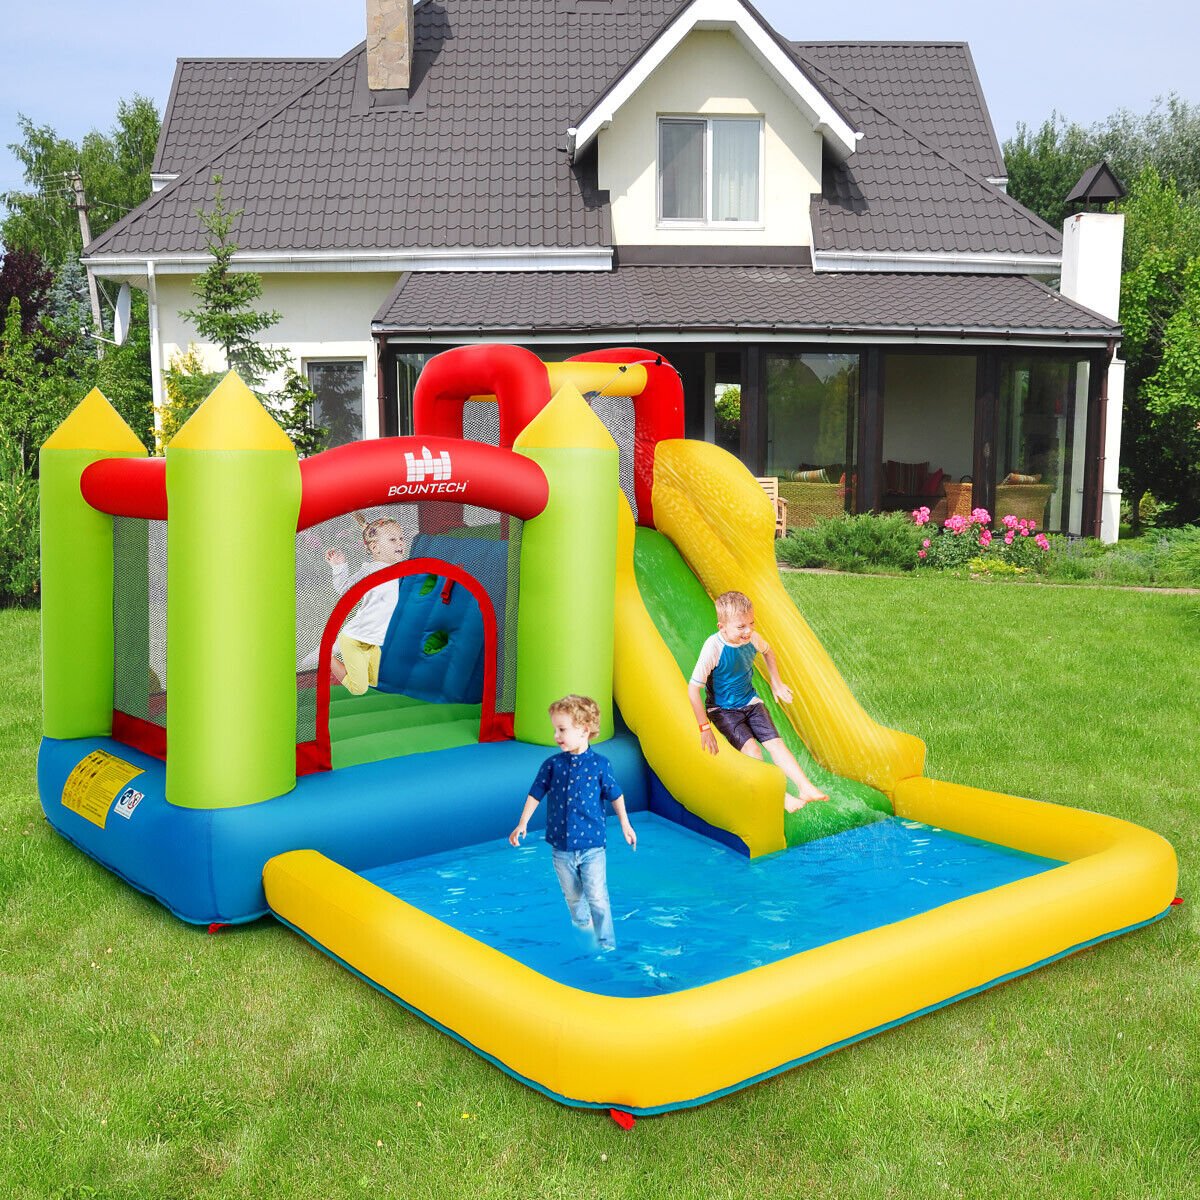 Water Slide Inflatable Castle - Kids Pool Party Fun (Blower Not Included)